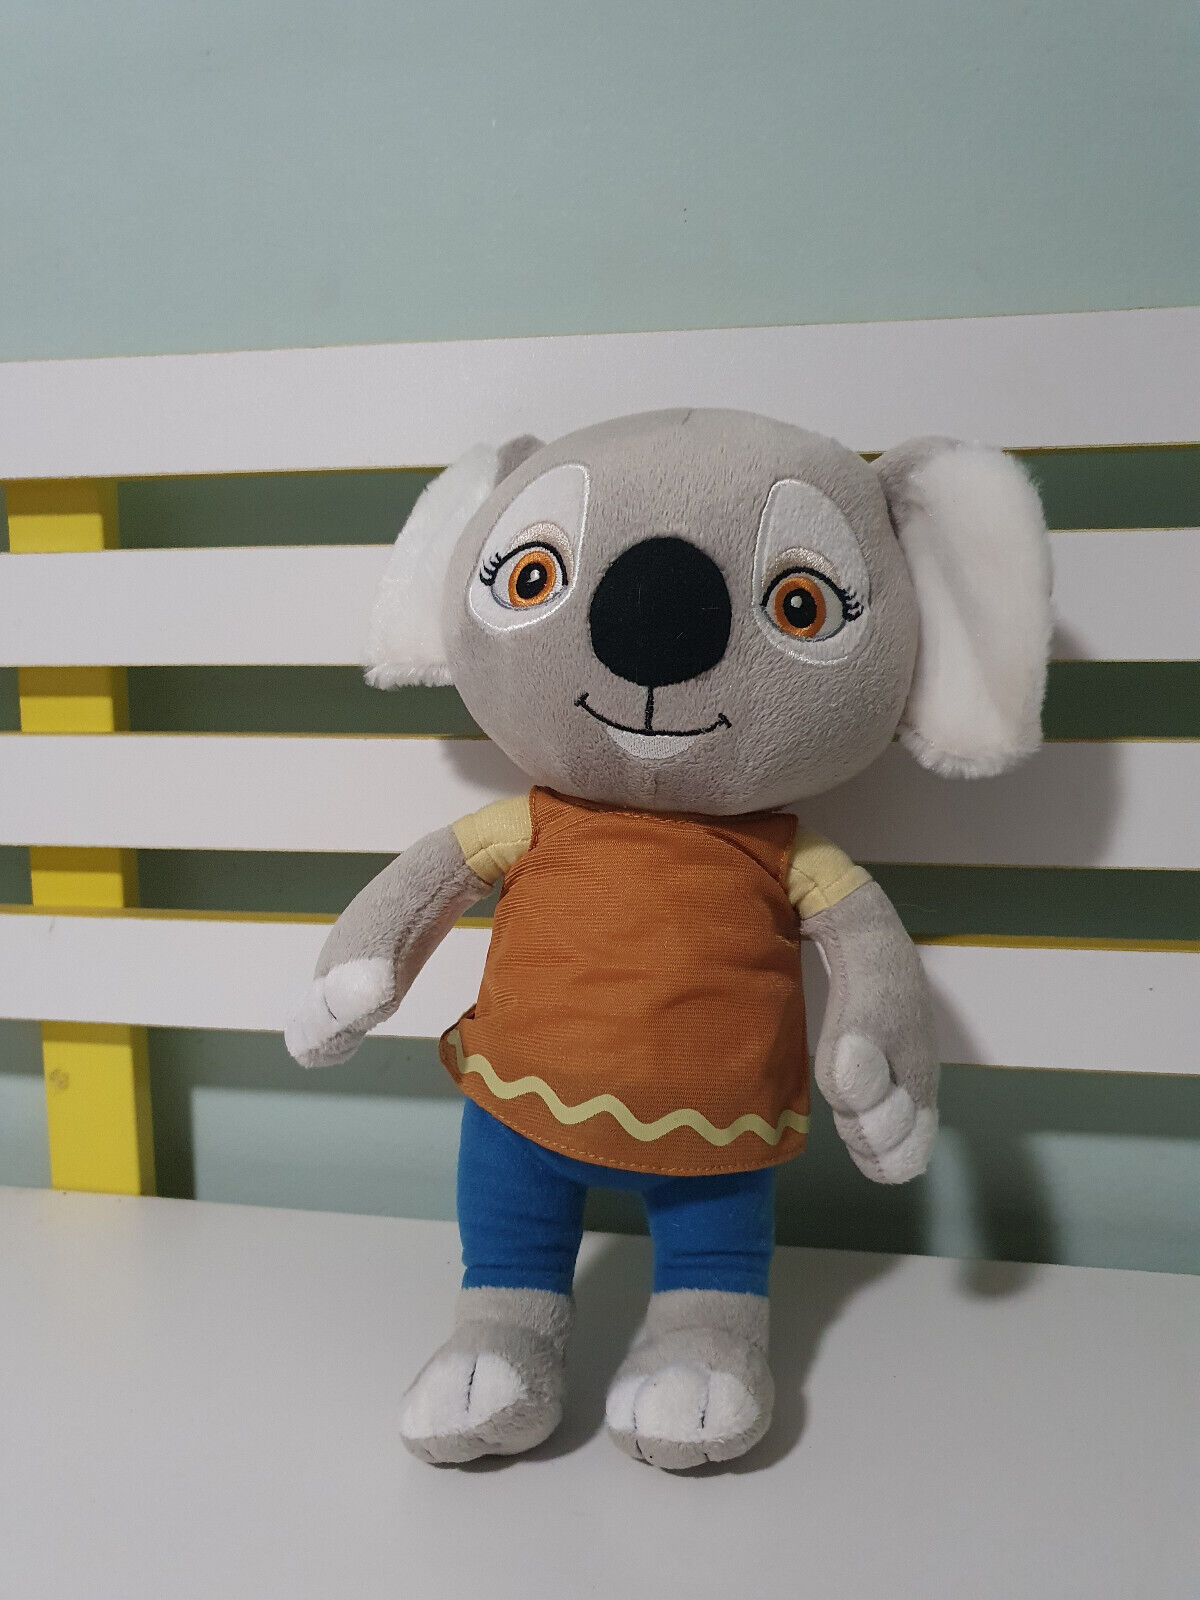 FLYING BARK PRODUCTIONS BLINKY BILL NUTSY CHARACTER PLUSH TOY SOFT TOY 30CM TALL